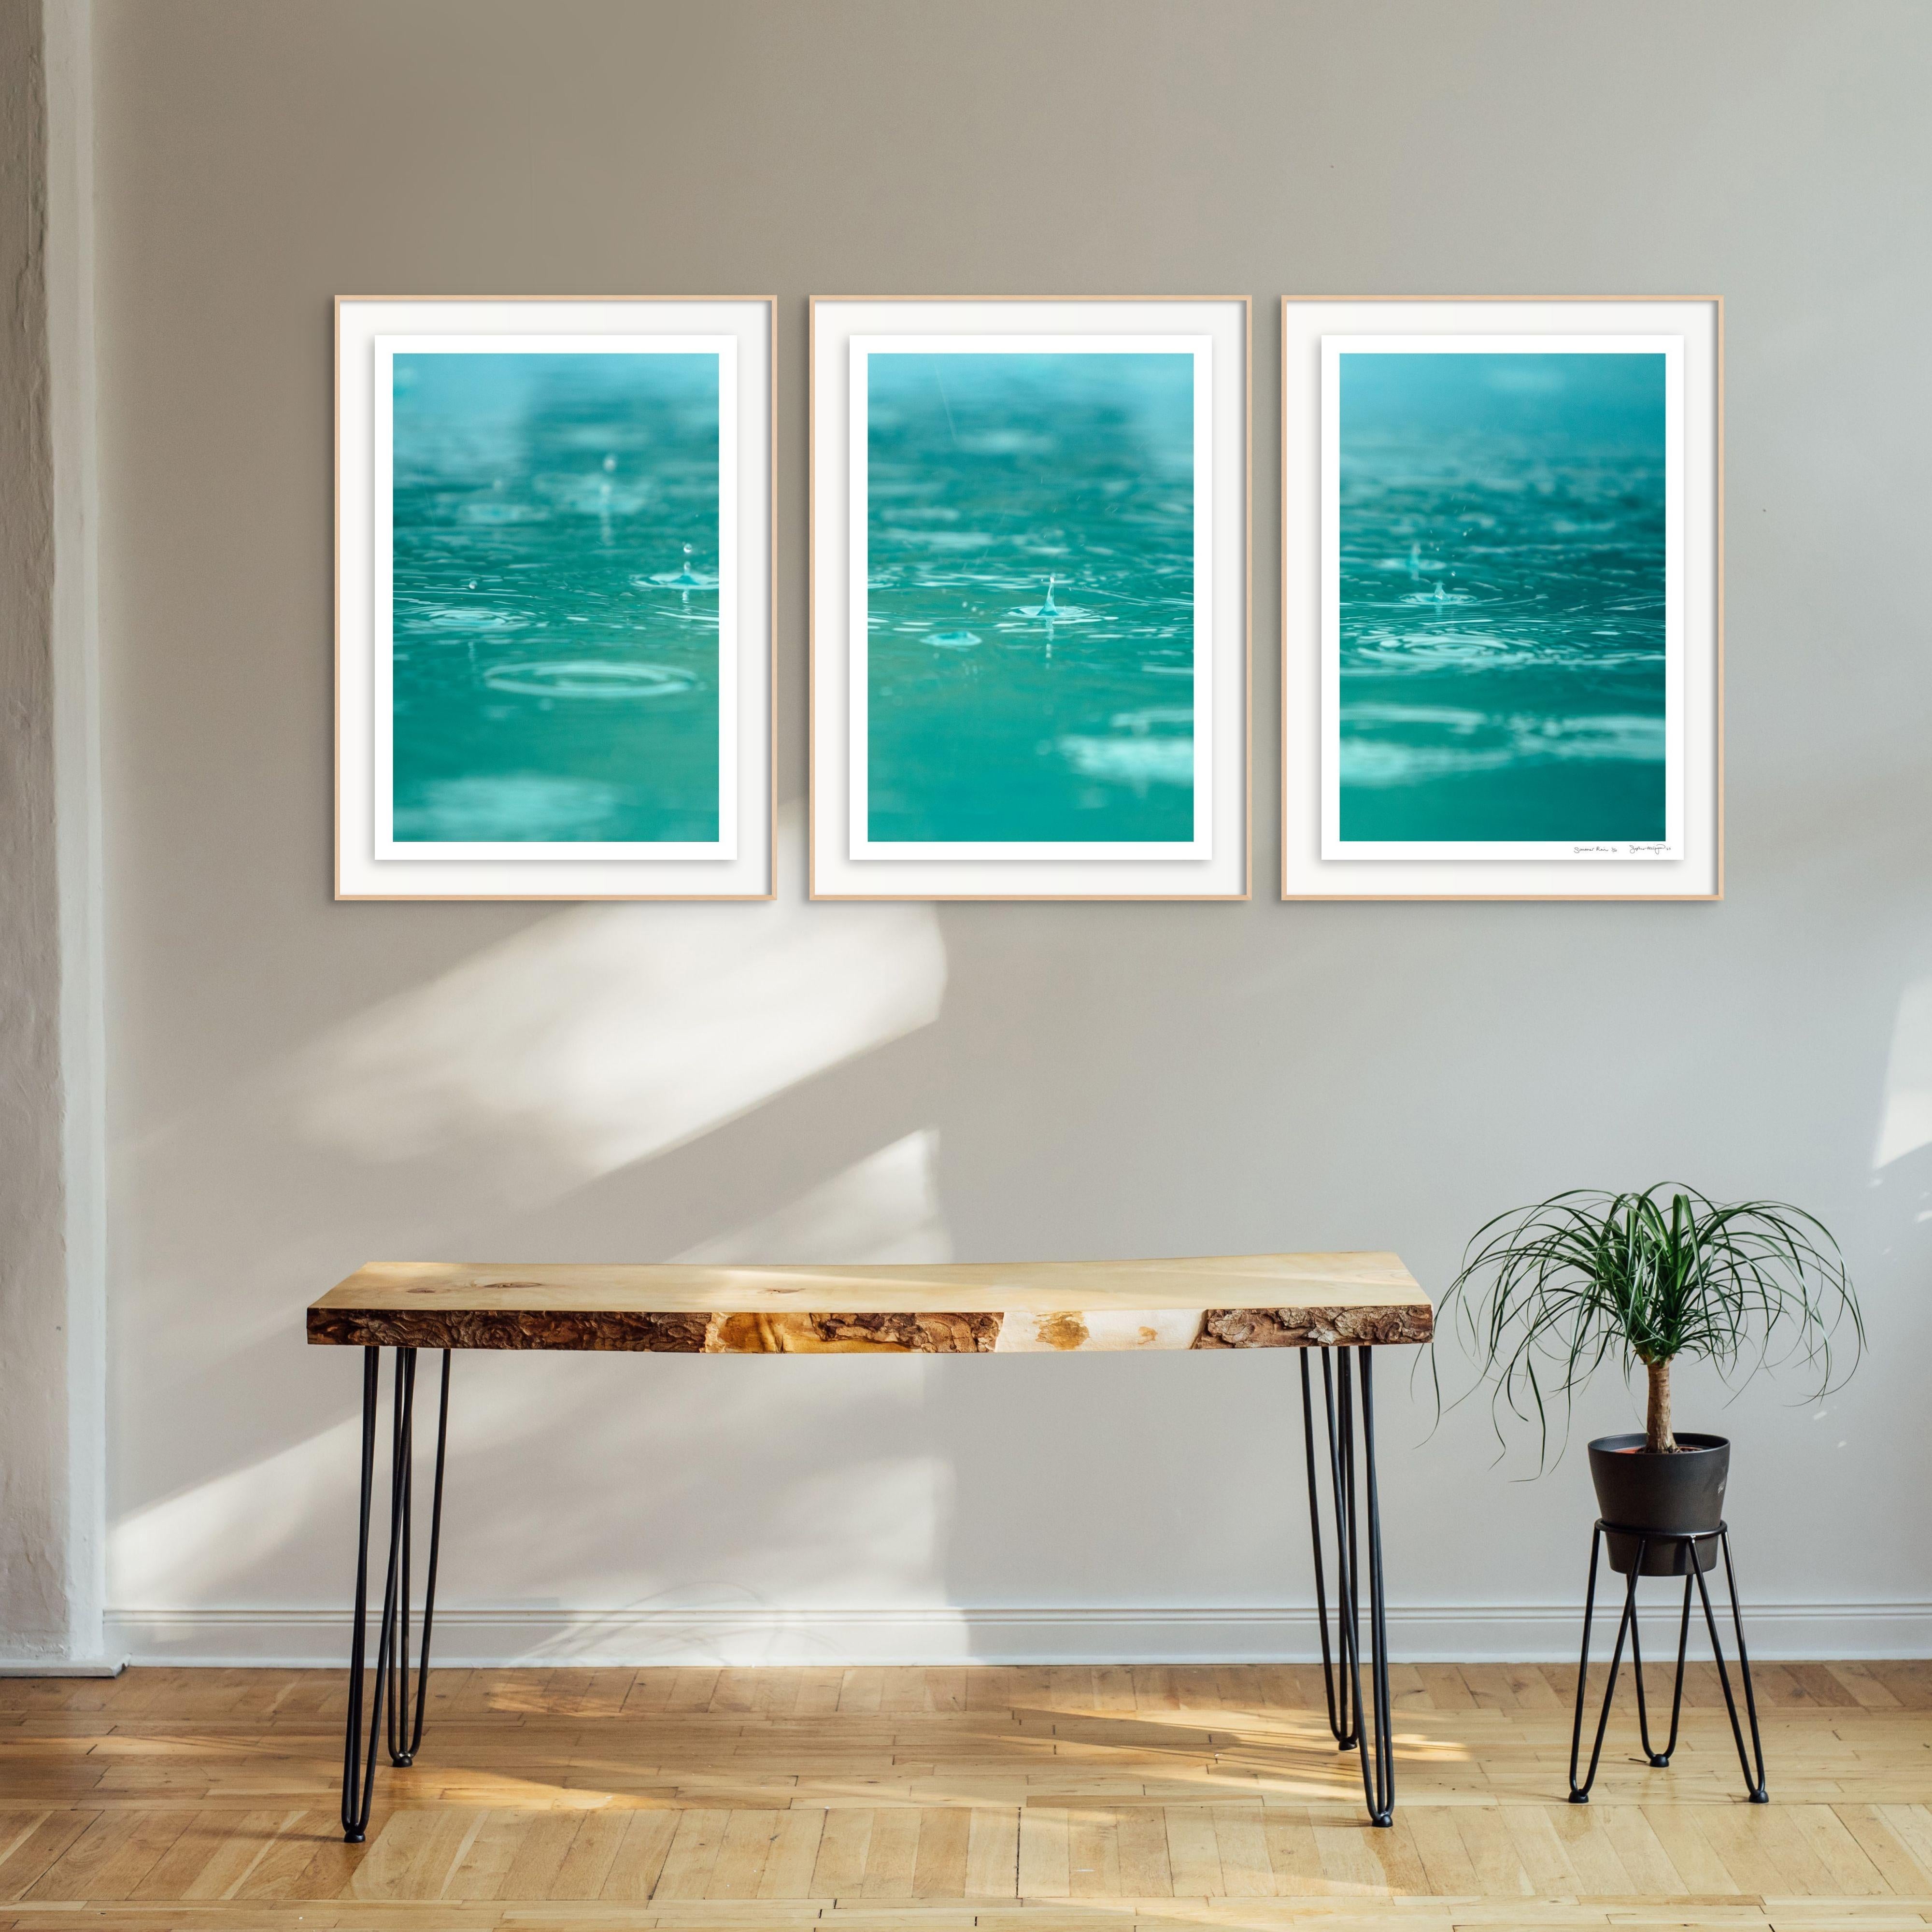 'Summer Rain' Limited Edition Photo Triptych. Pool water teal blue green  - Contemporary Photograph by Sophia Milligan